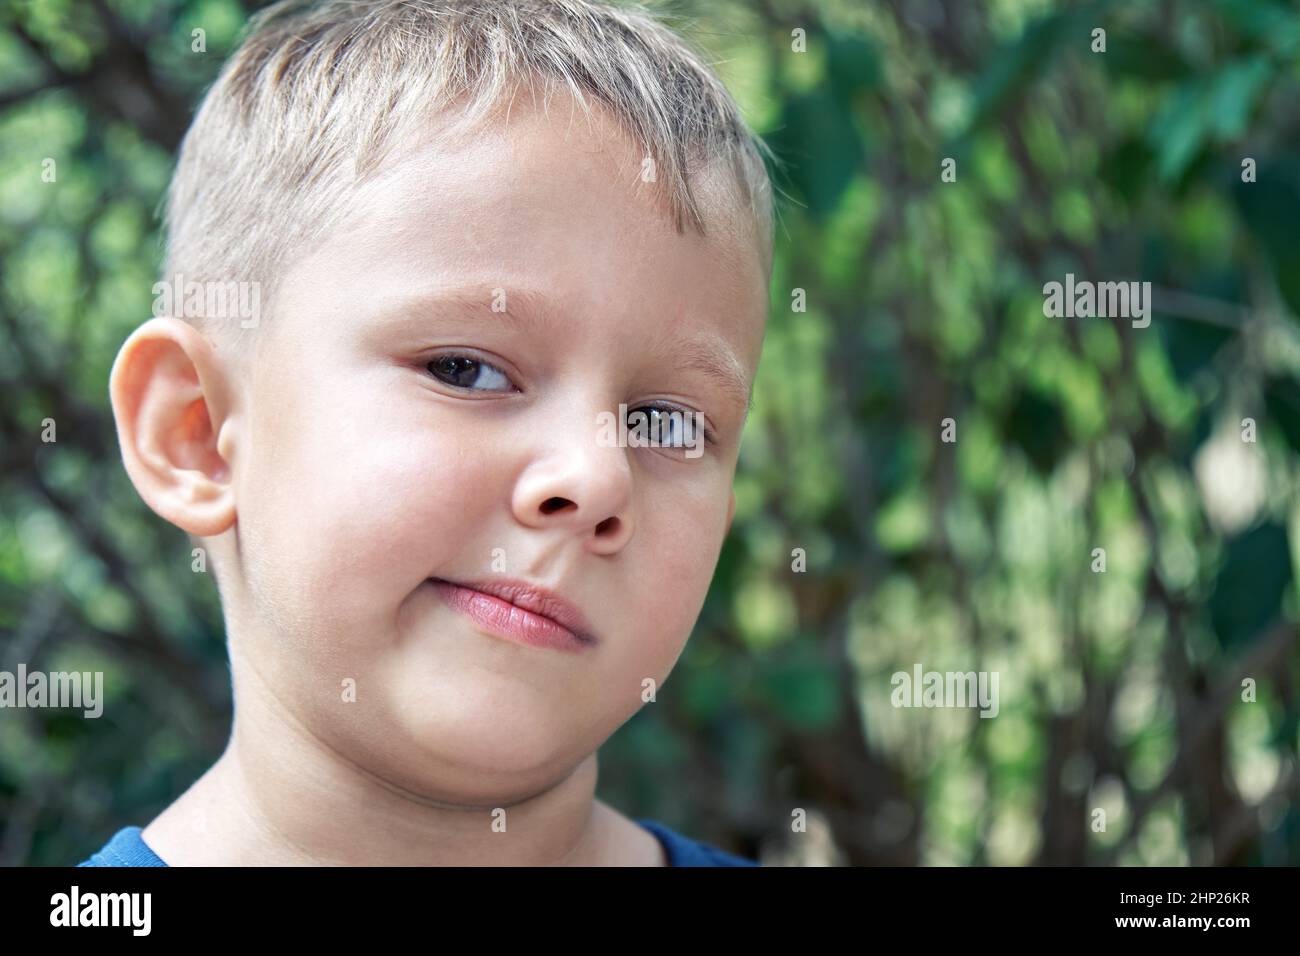 Blond preschooler grimaces making weird face expressions. Boy has fun walking outdoors in shade of trees in park on summer holiday closeup Stock Photo